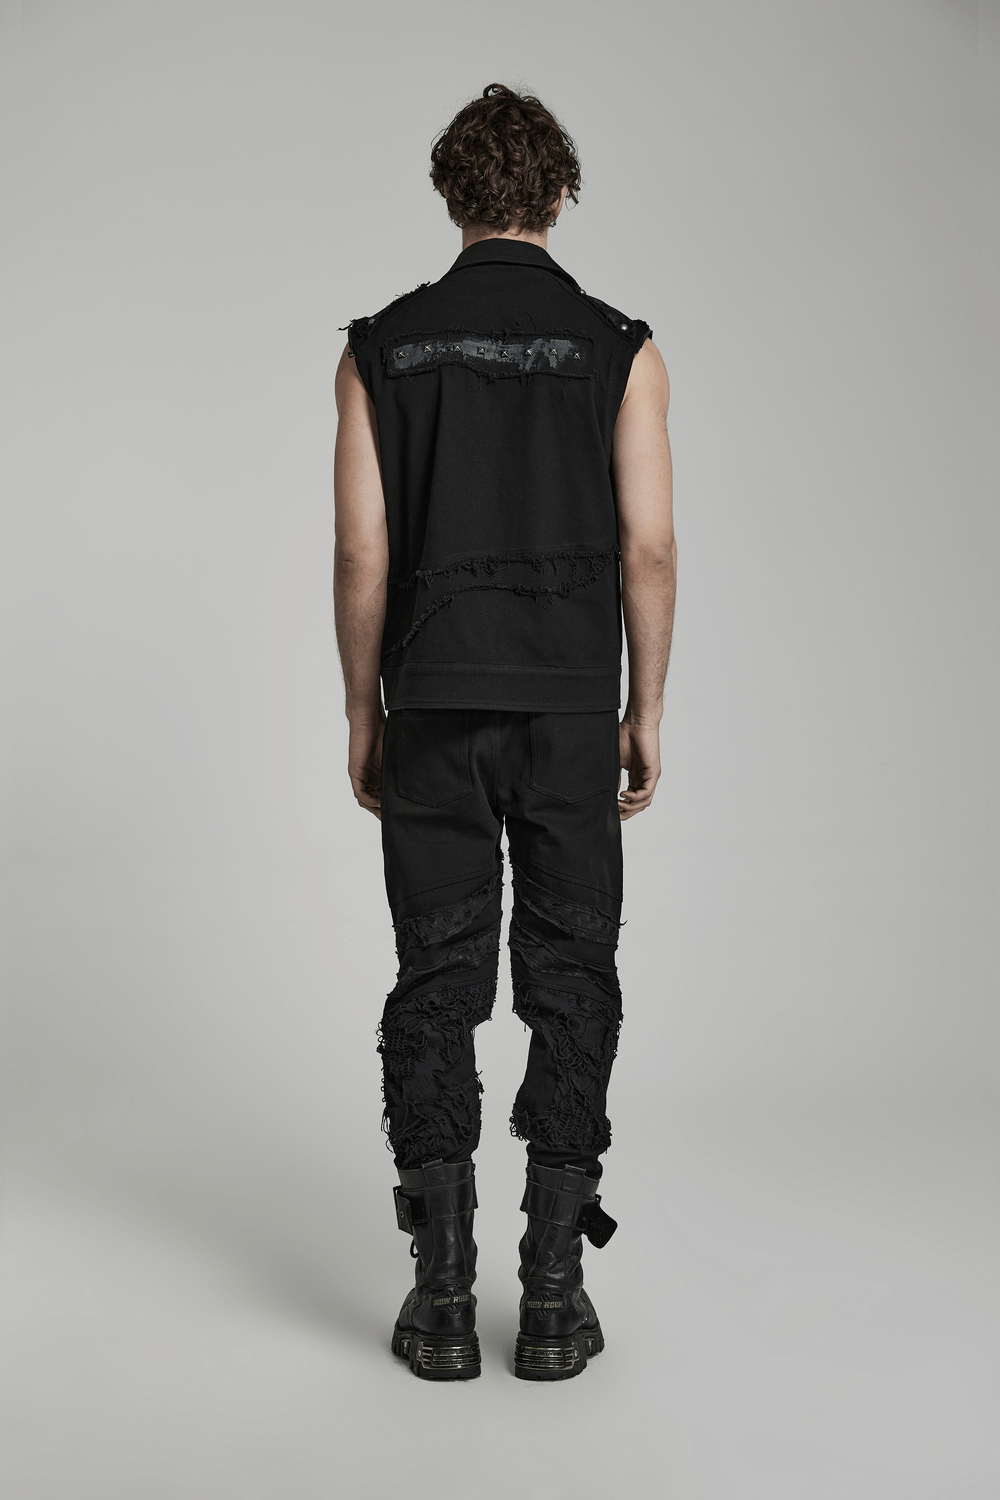 Stylish Ripped Knit Black Gothic Trousers for Men - HARD'N'HEAVY